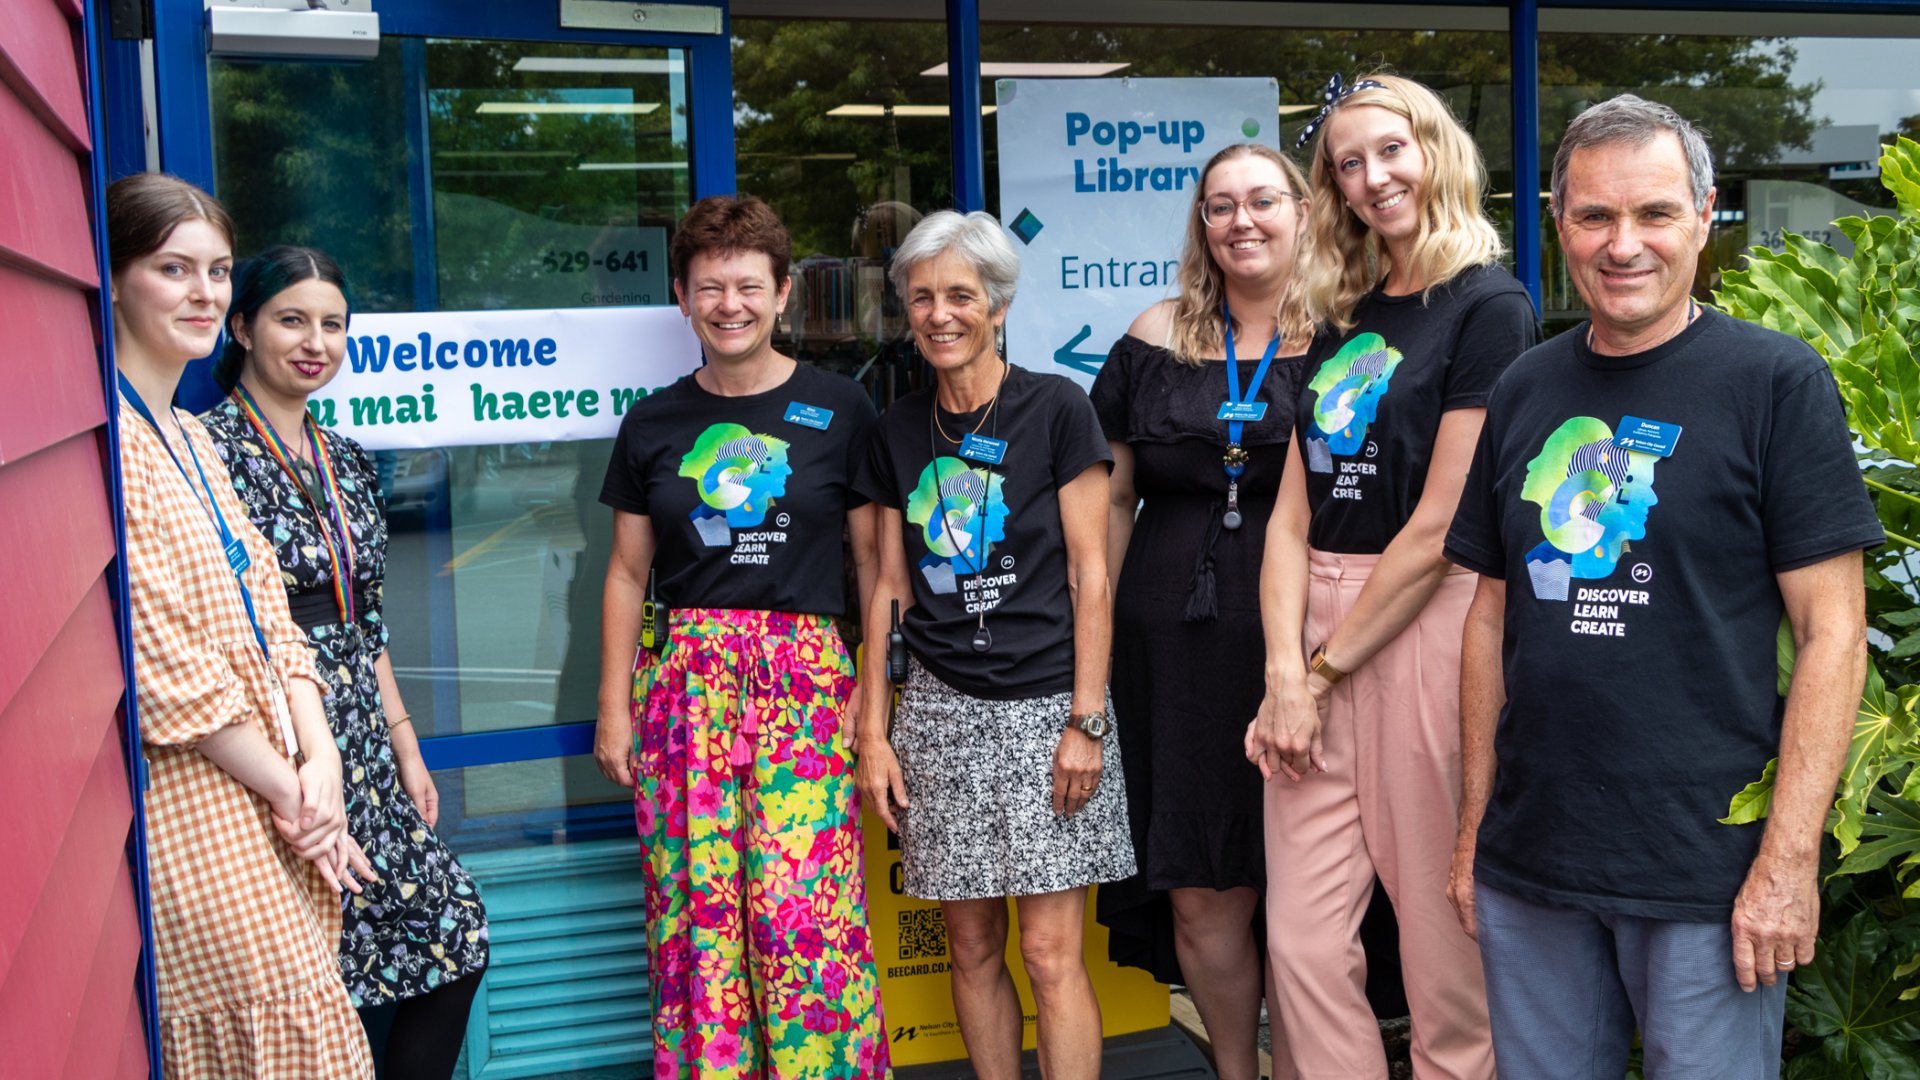 Library staff welcome the public to the Elma Turner Pop-up Library extension through the new entrance off the Library carpark on 25 January 2023.